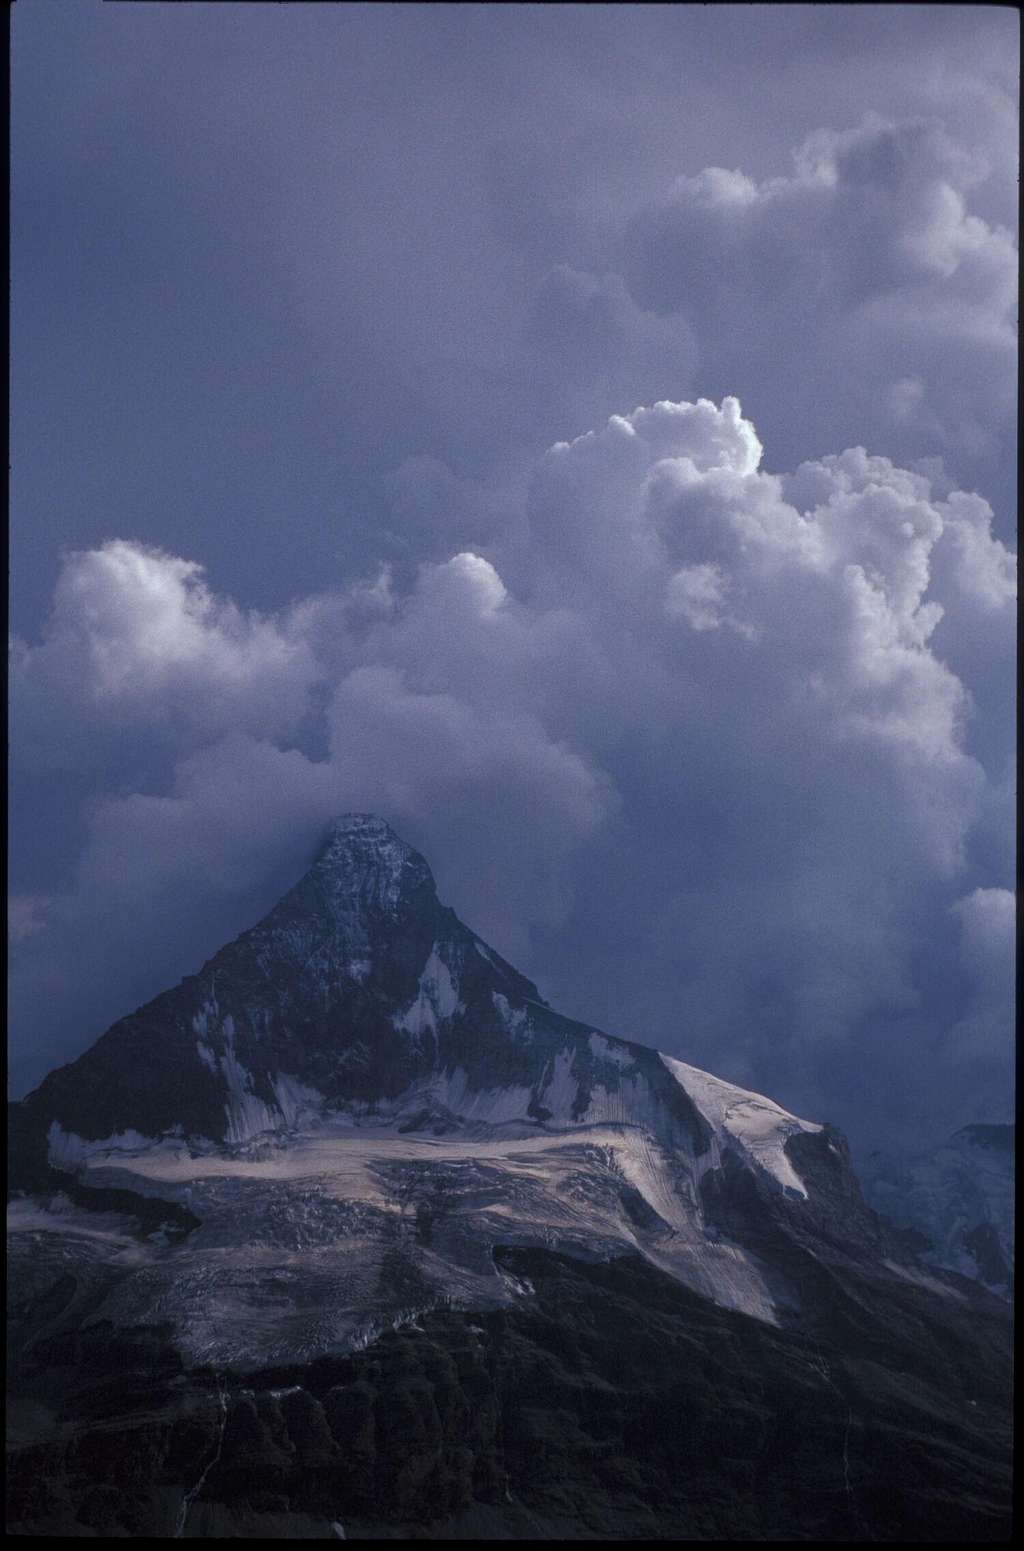 Matterhorn North Face and the approaching Storm